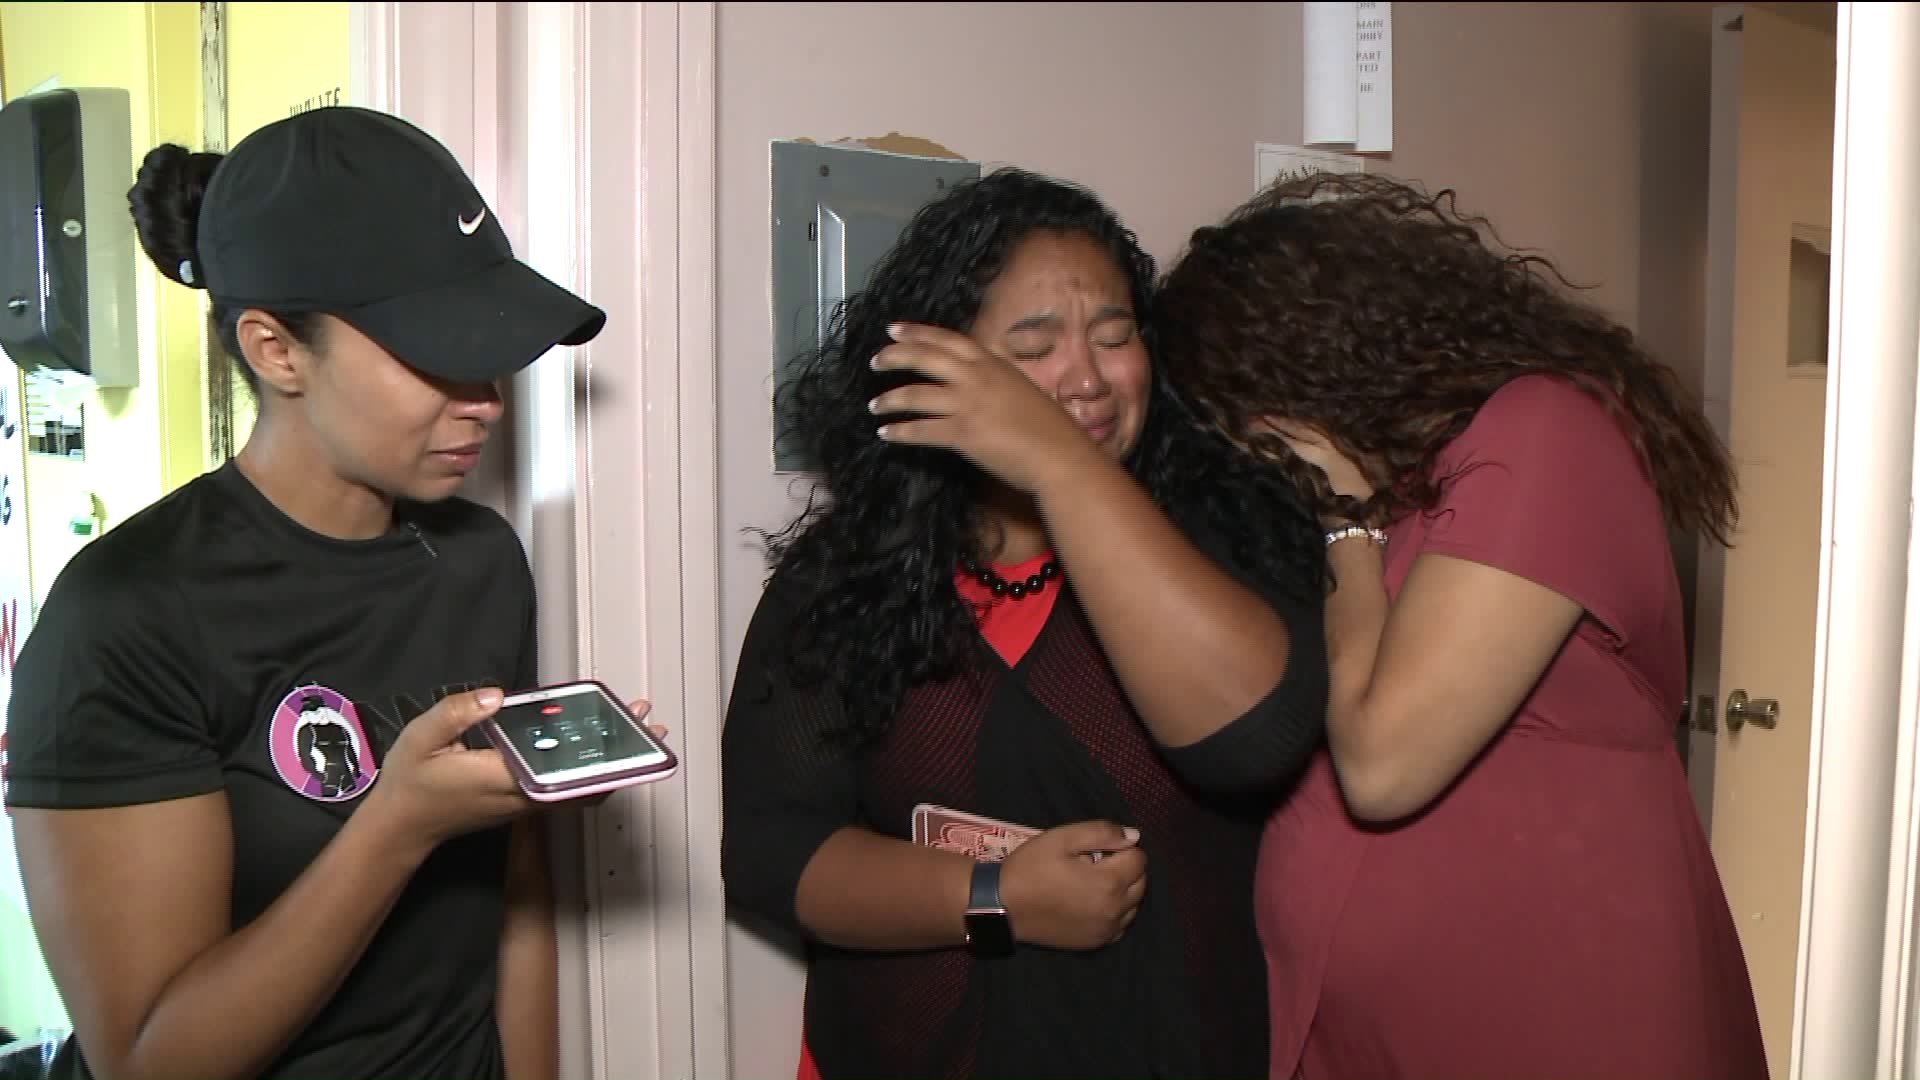 After days of waiting, sisters hear from their mom in Puerto Rico